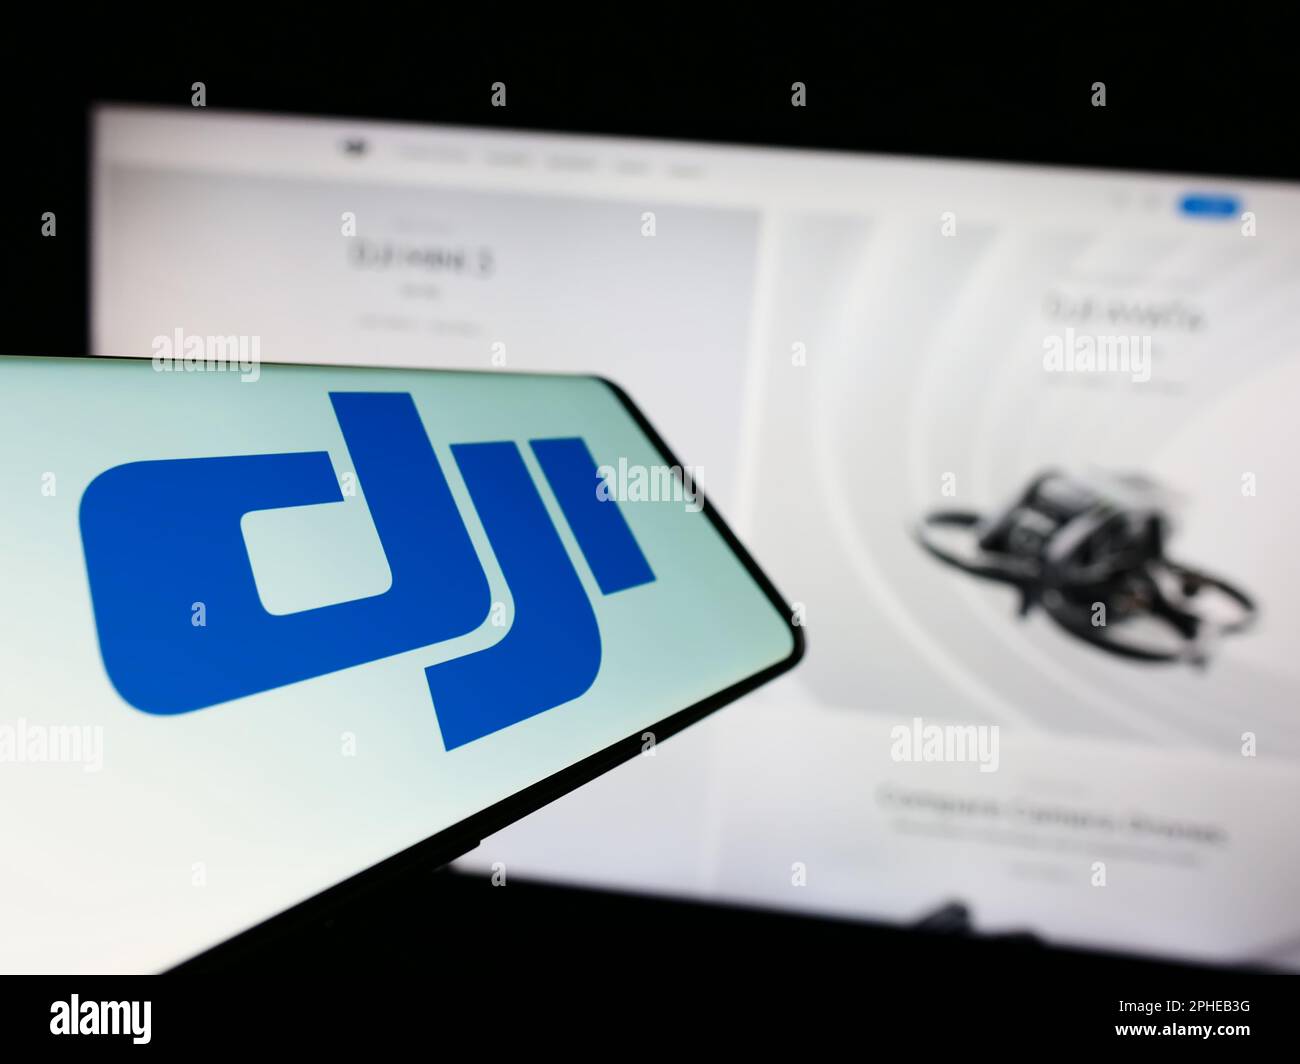 Smartphone with logo of drone company SZ DJI Technology Co. Ltd. on screen in front of business website. Focus on center-left of phone display. Stock Photo